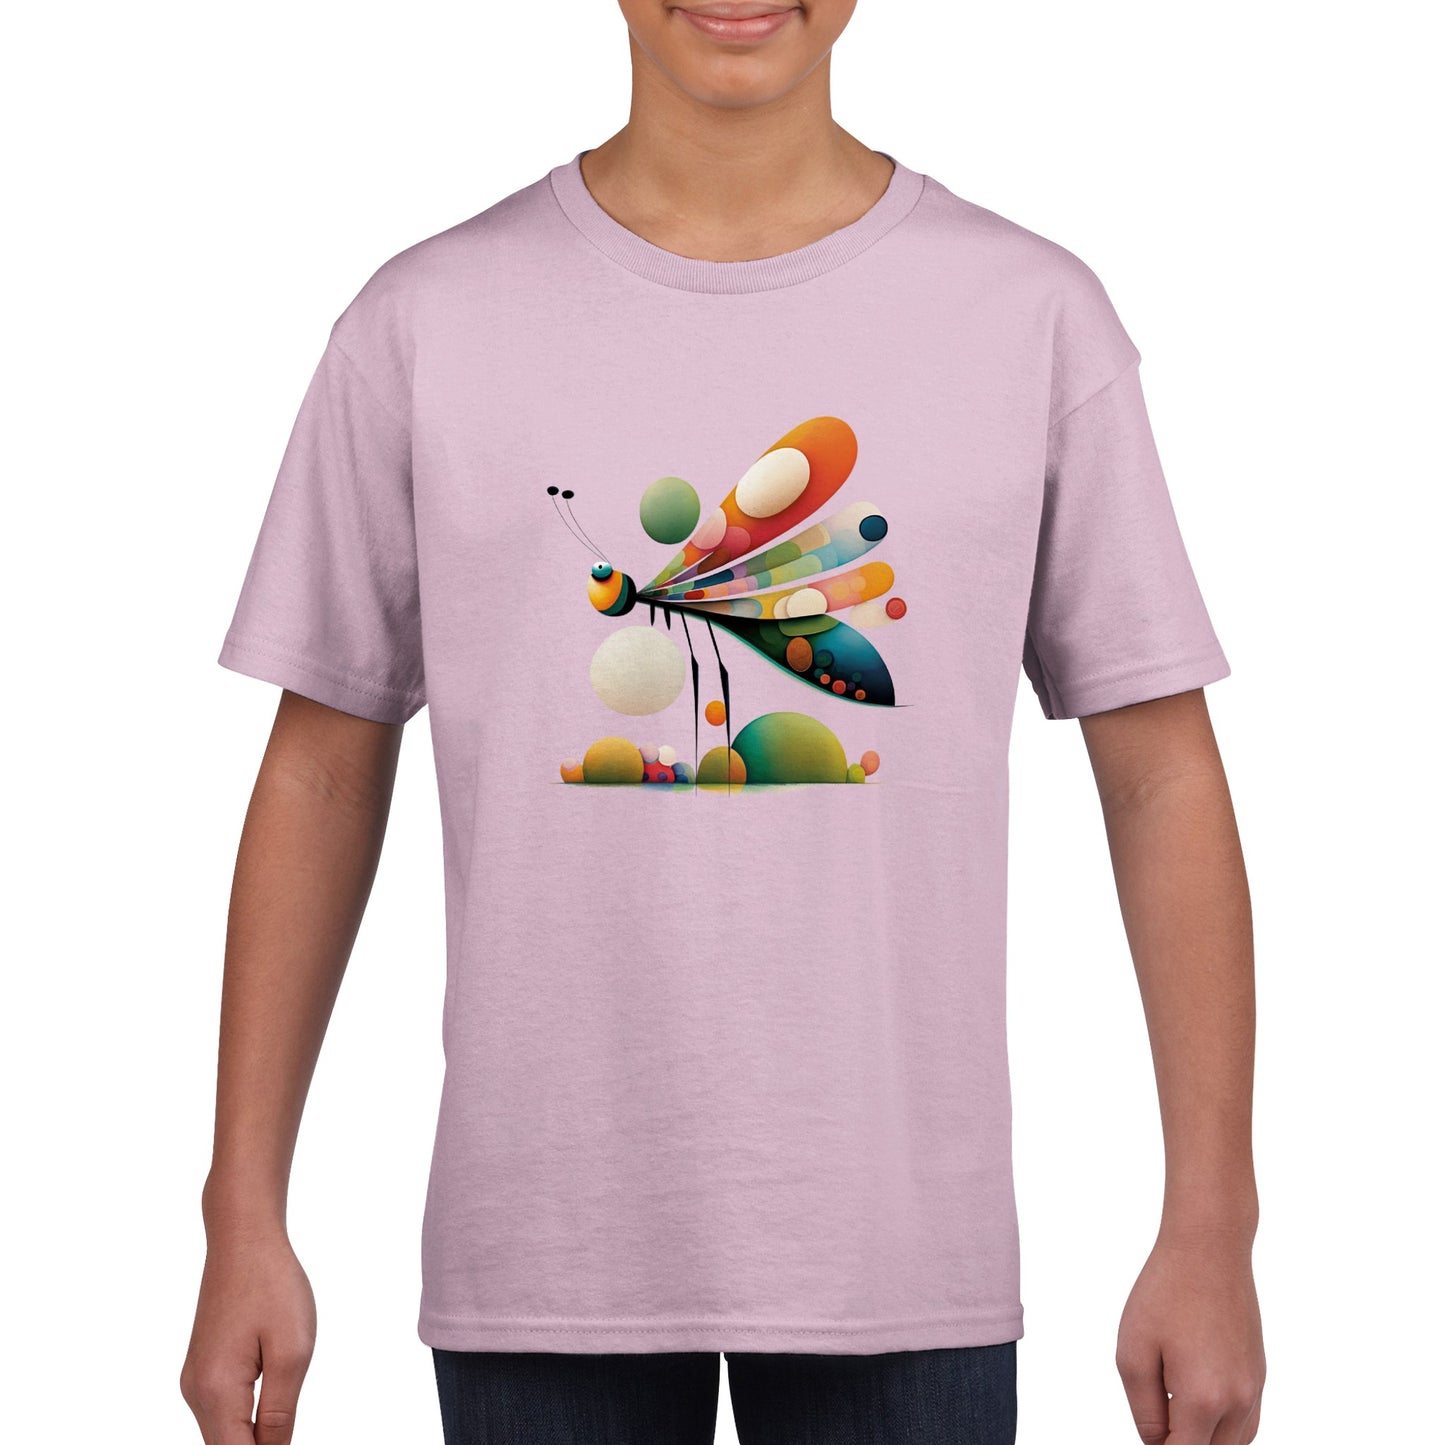 Introducing the Classic Kids Crewneck T-Shirt with Abstract Dragonfly Print - Perfect for Your Little Fashionista!